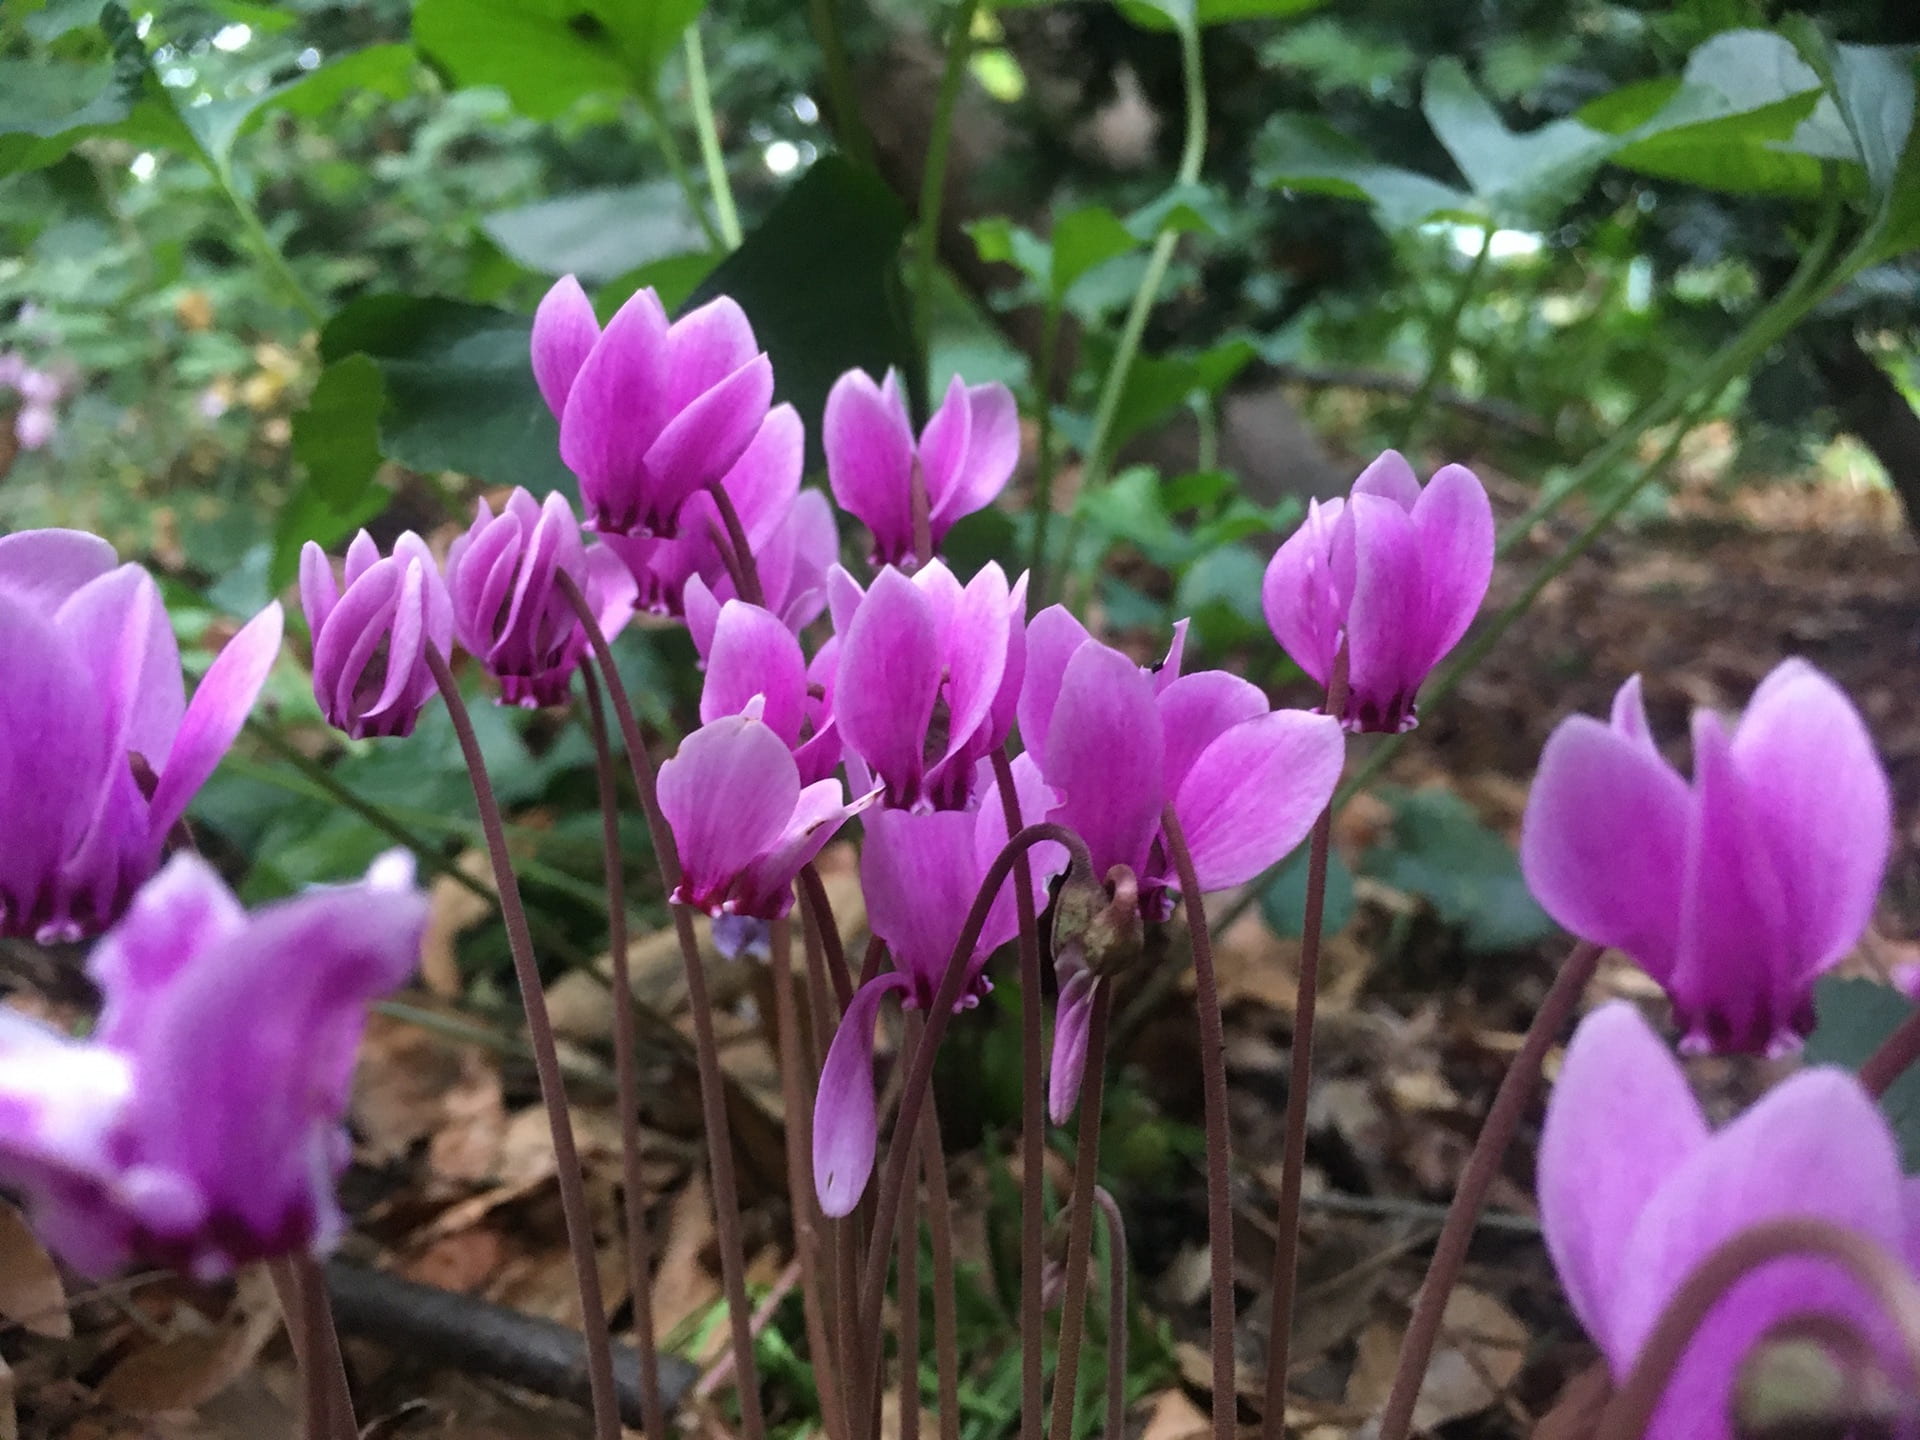 The flowers of Cyclamen hederifolium bloom before its foliage emerges for the winter.